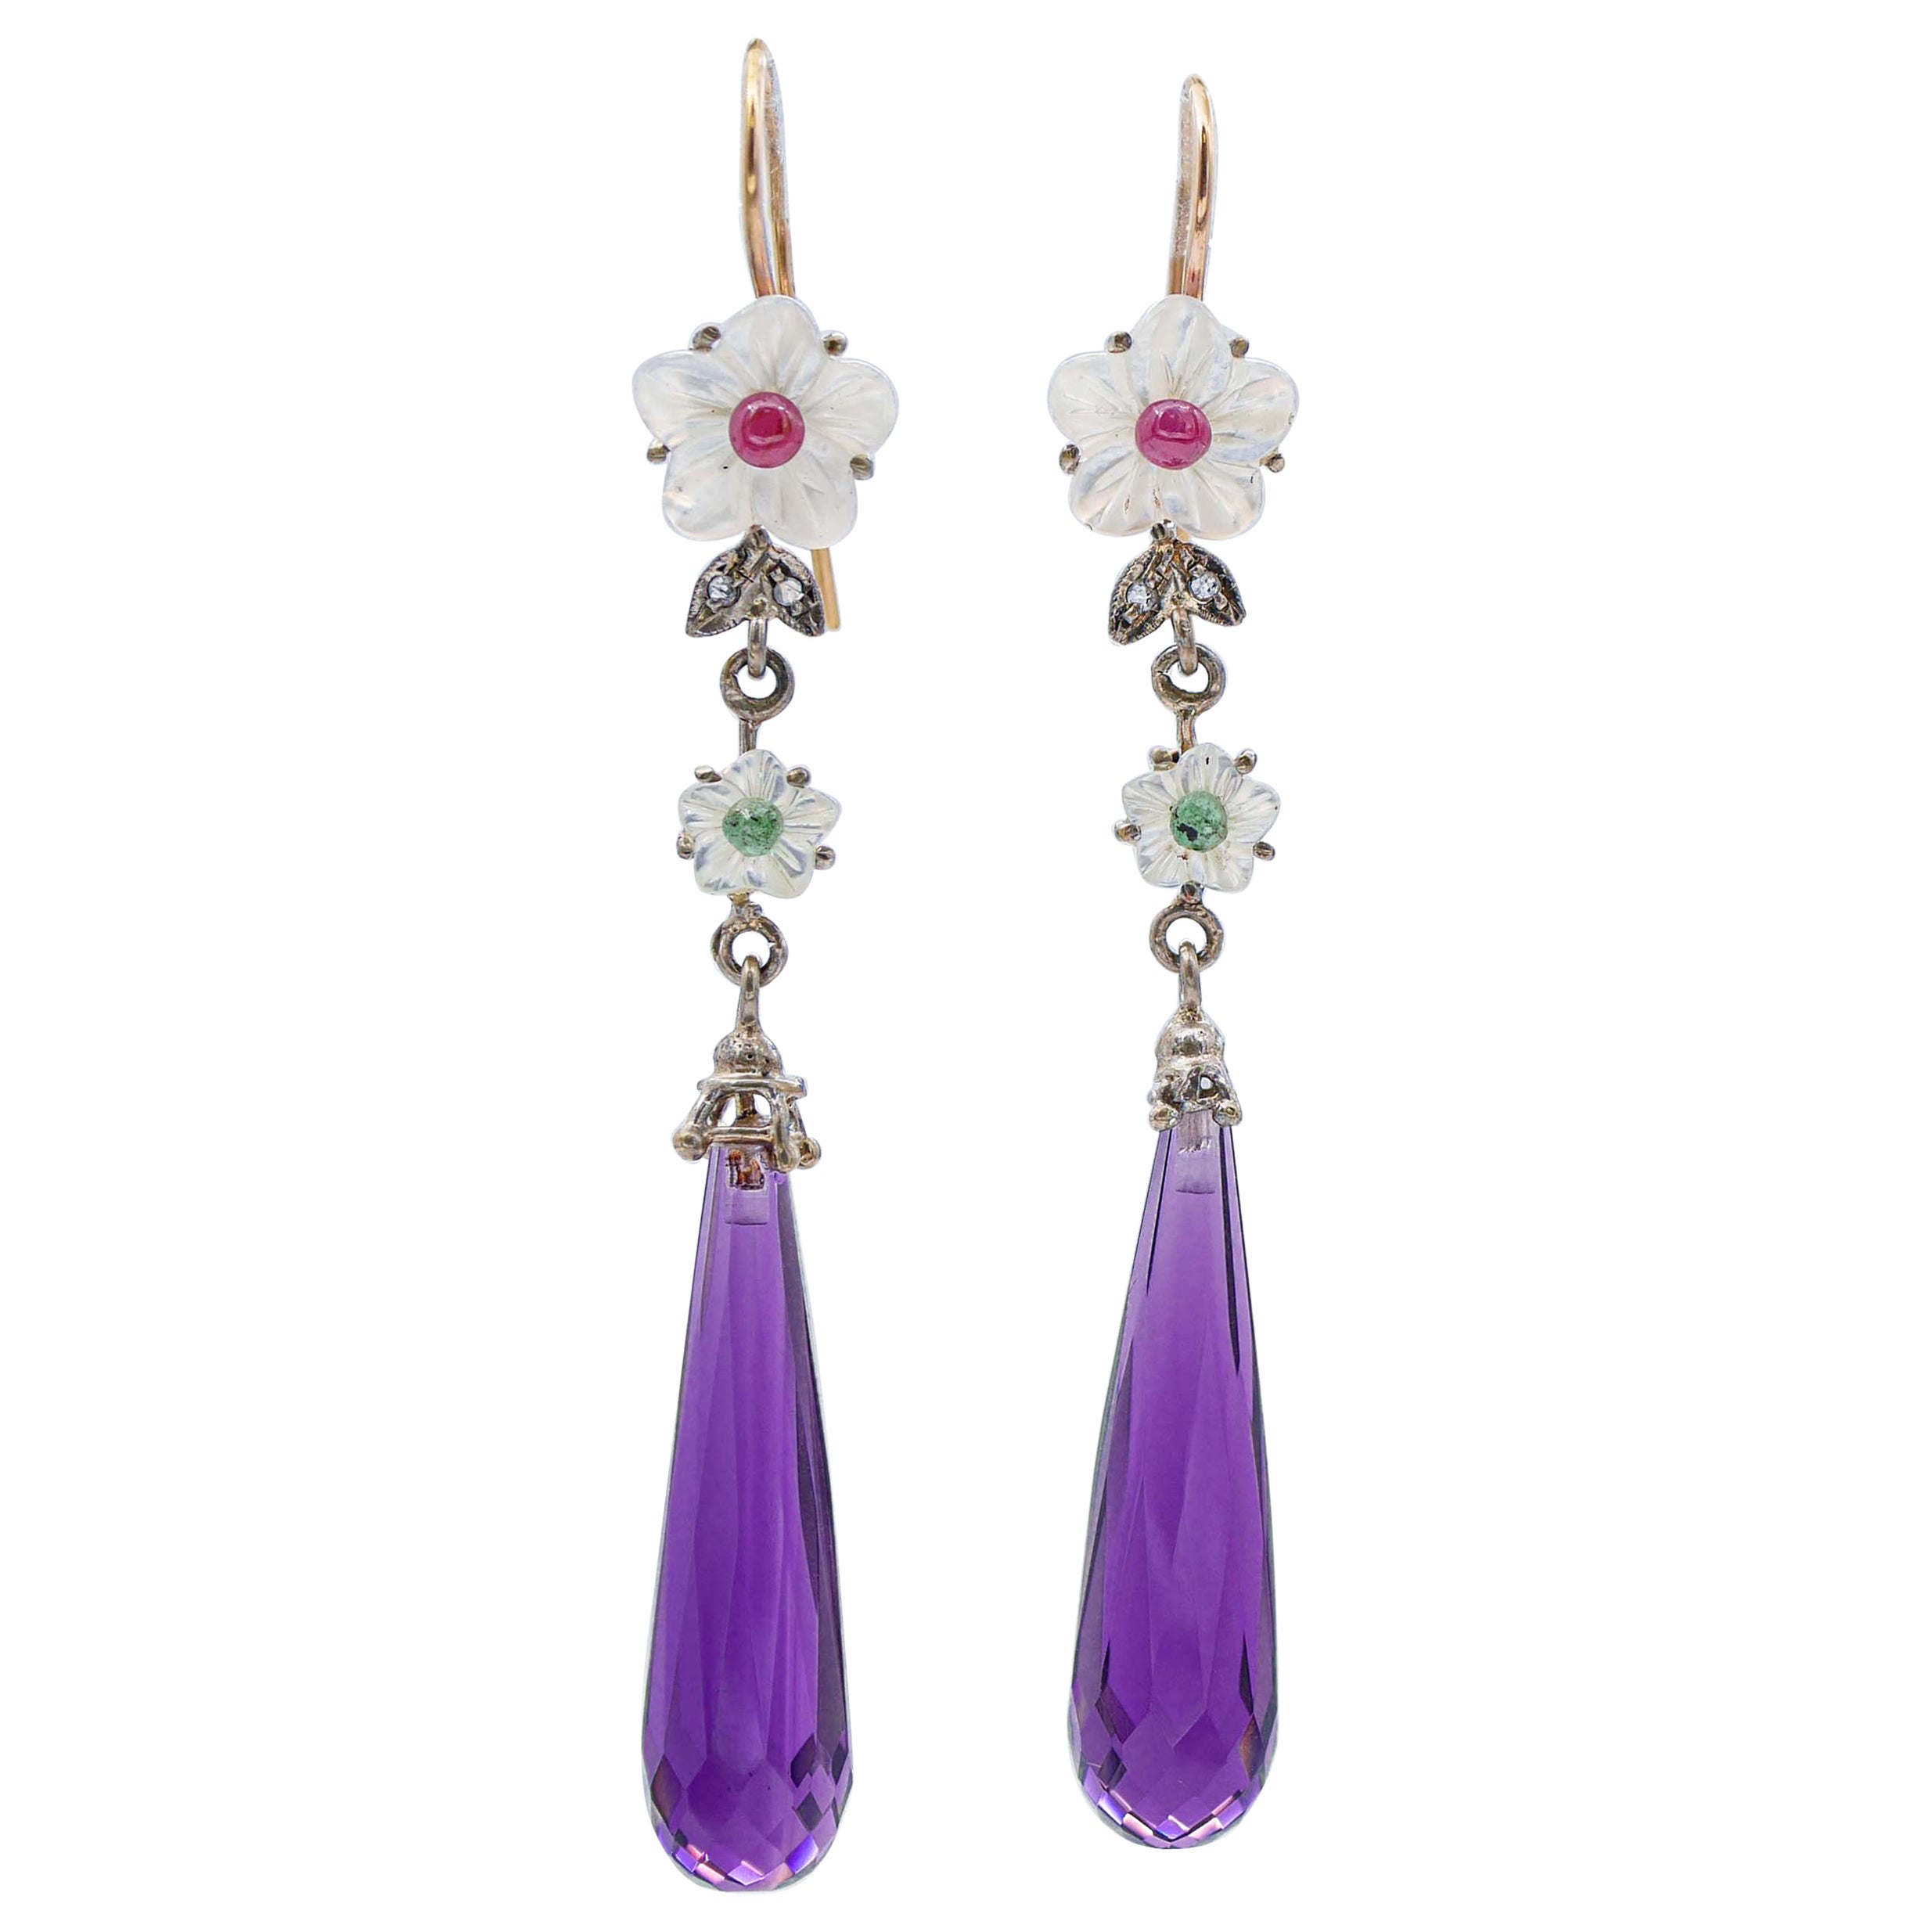 Amethysts, Emeralds, Diamonds, Rubies, White Stones, Gold and Silver Earrings For Sale